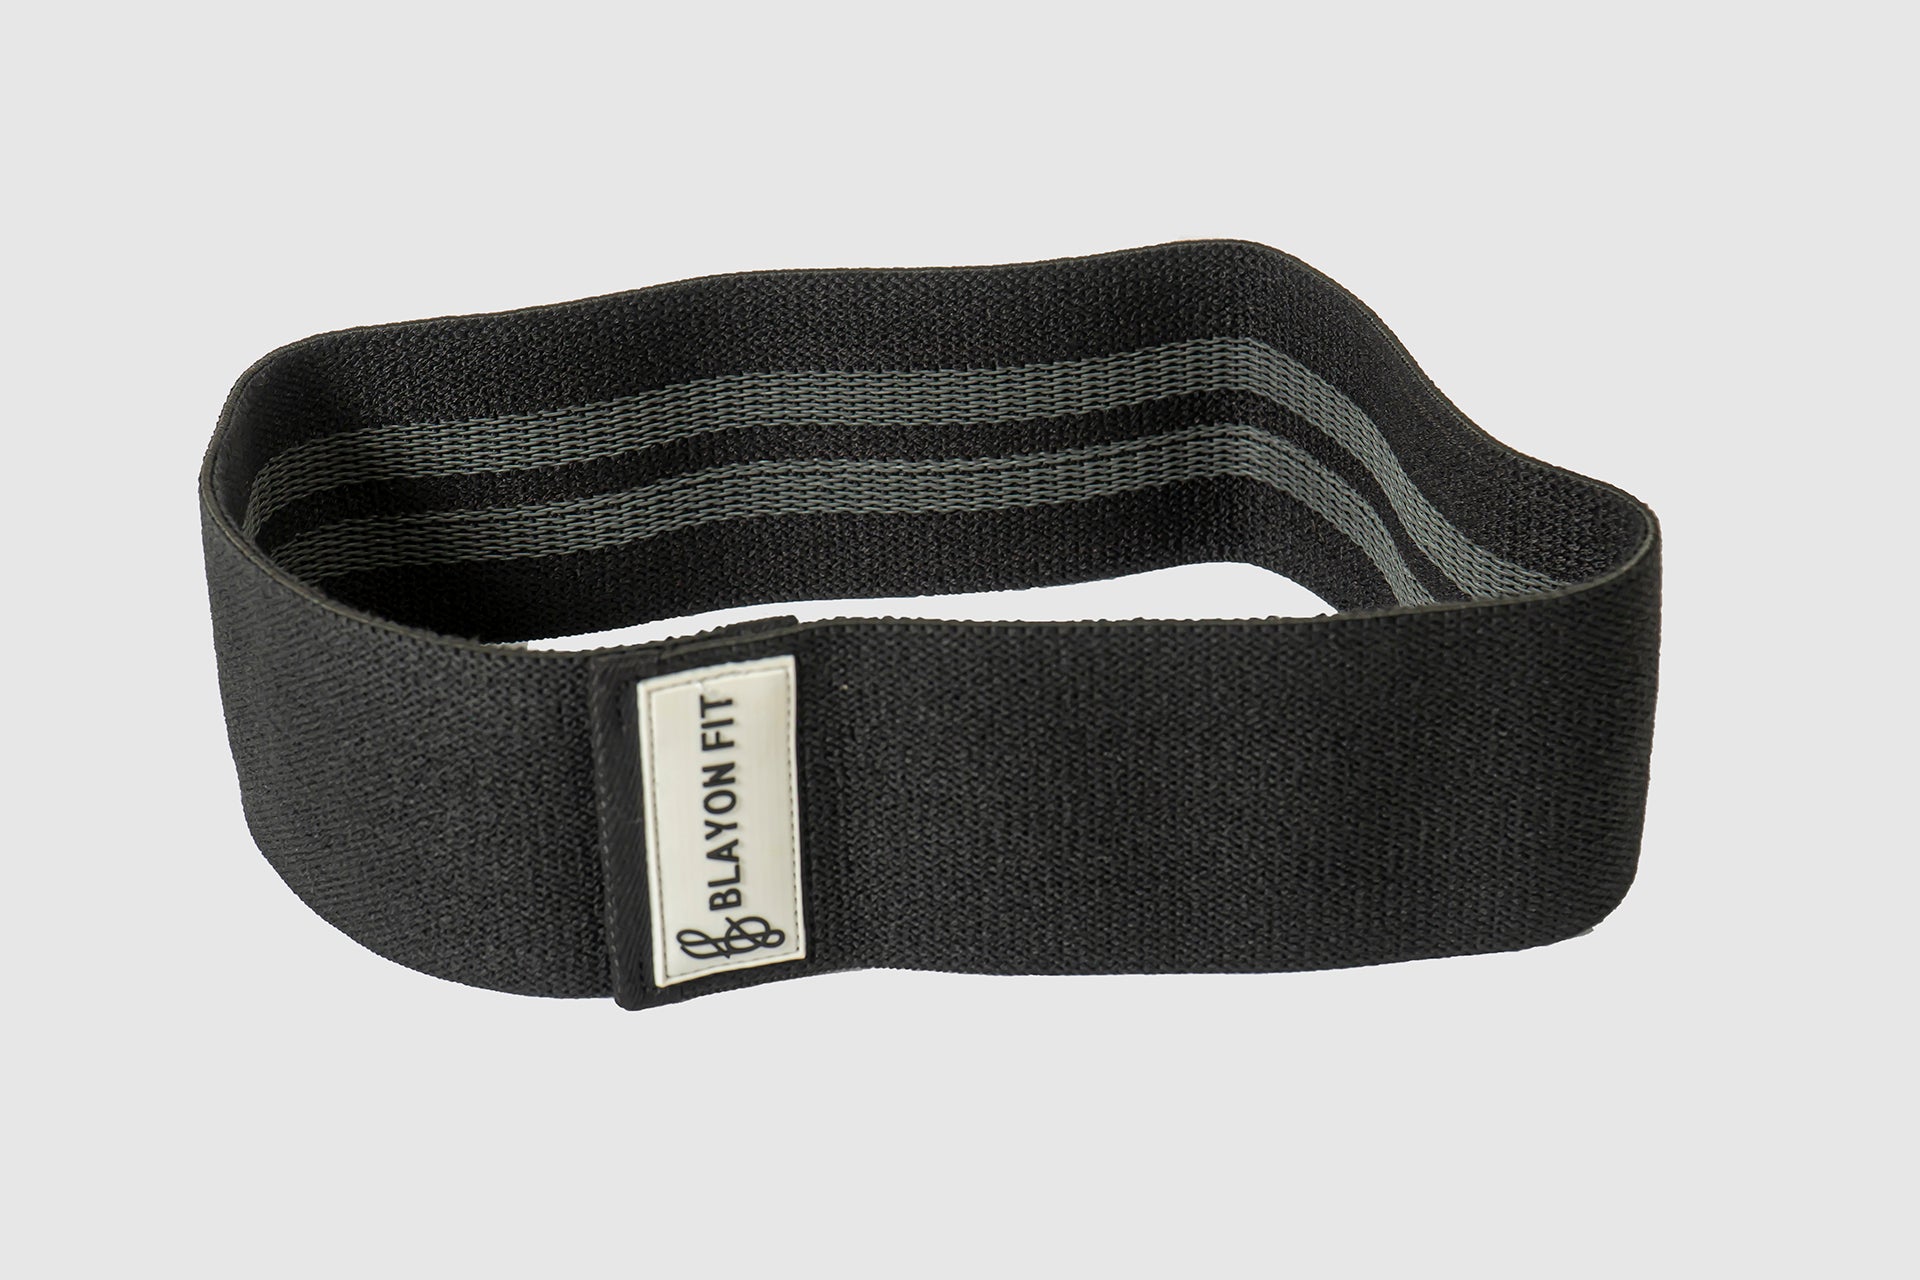 high quality fabric resistant bands are essential for a home workout to target all your muscles